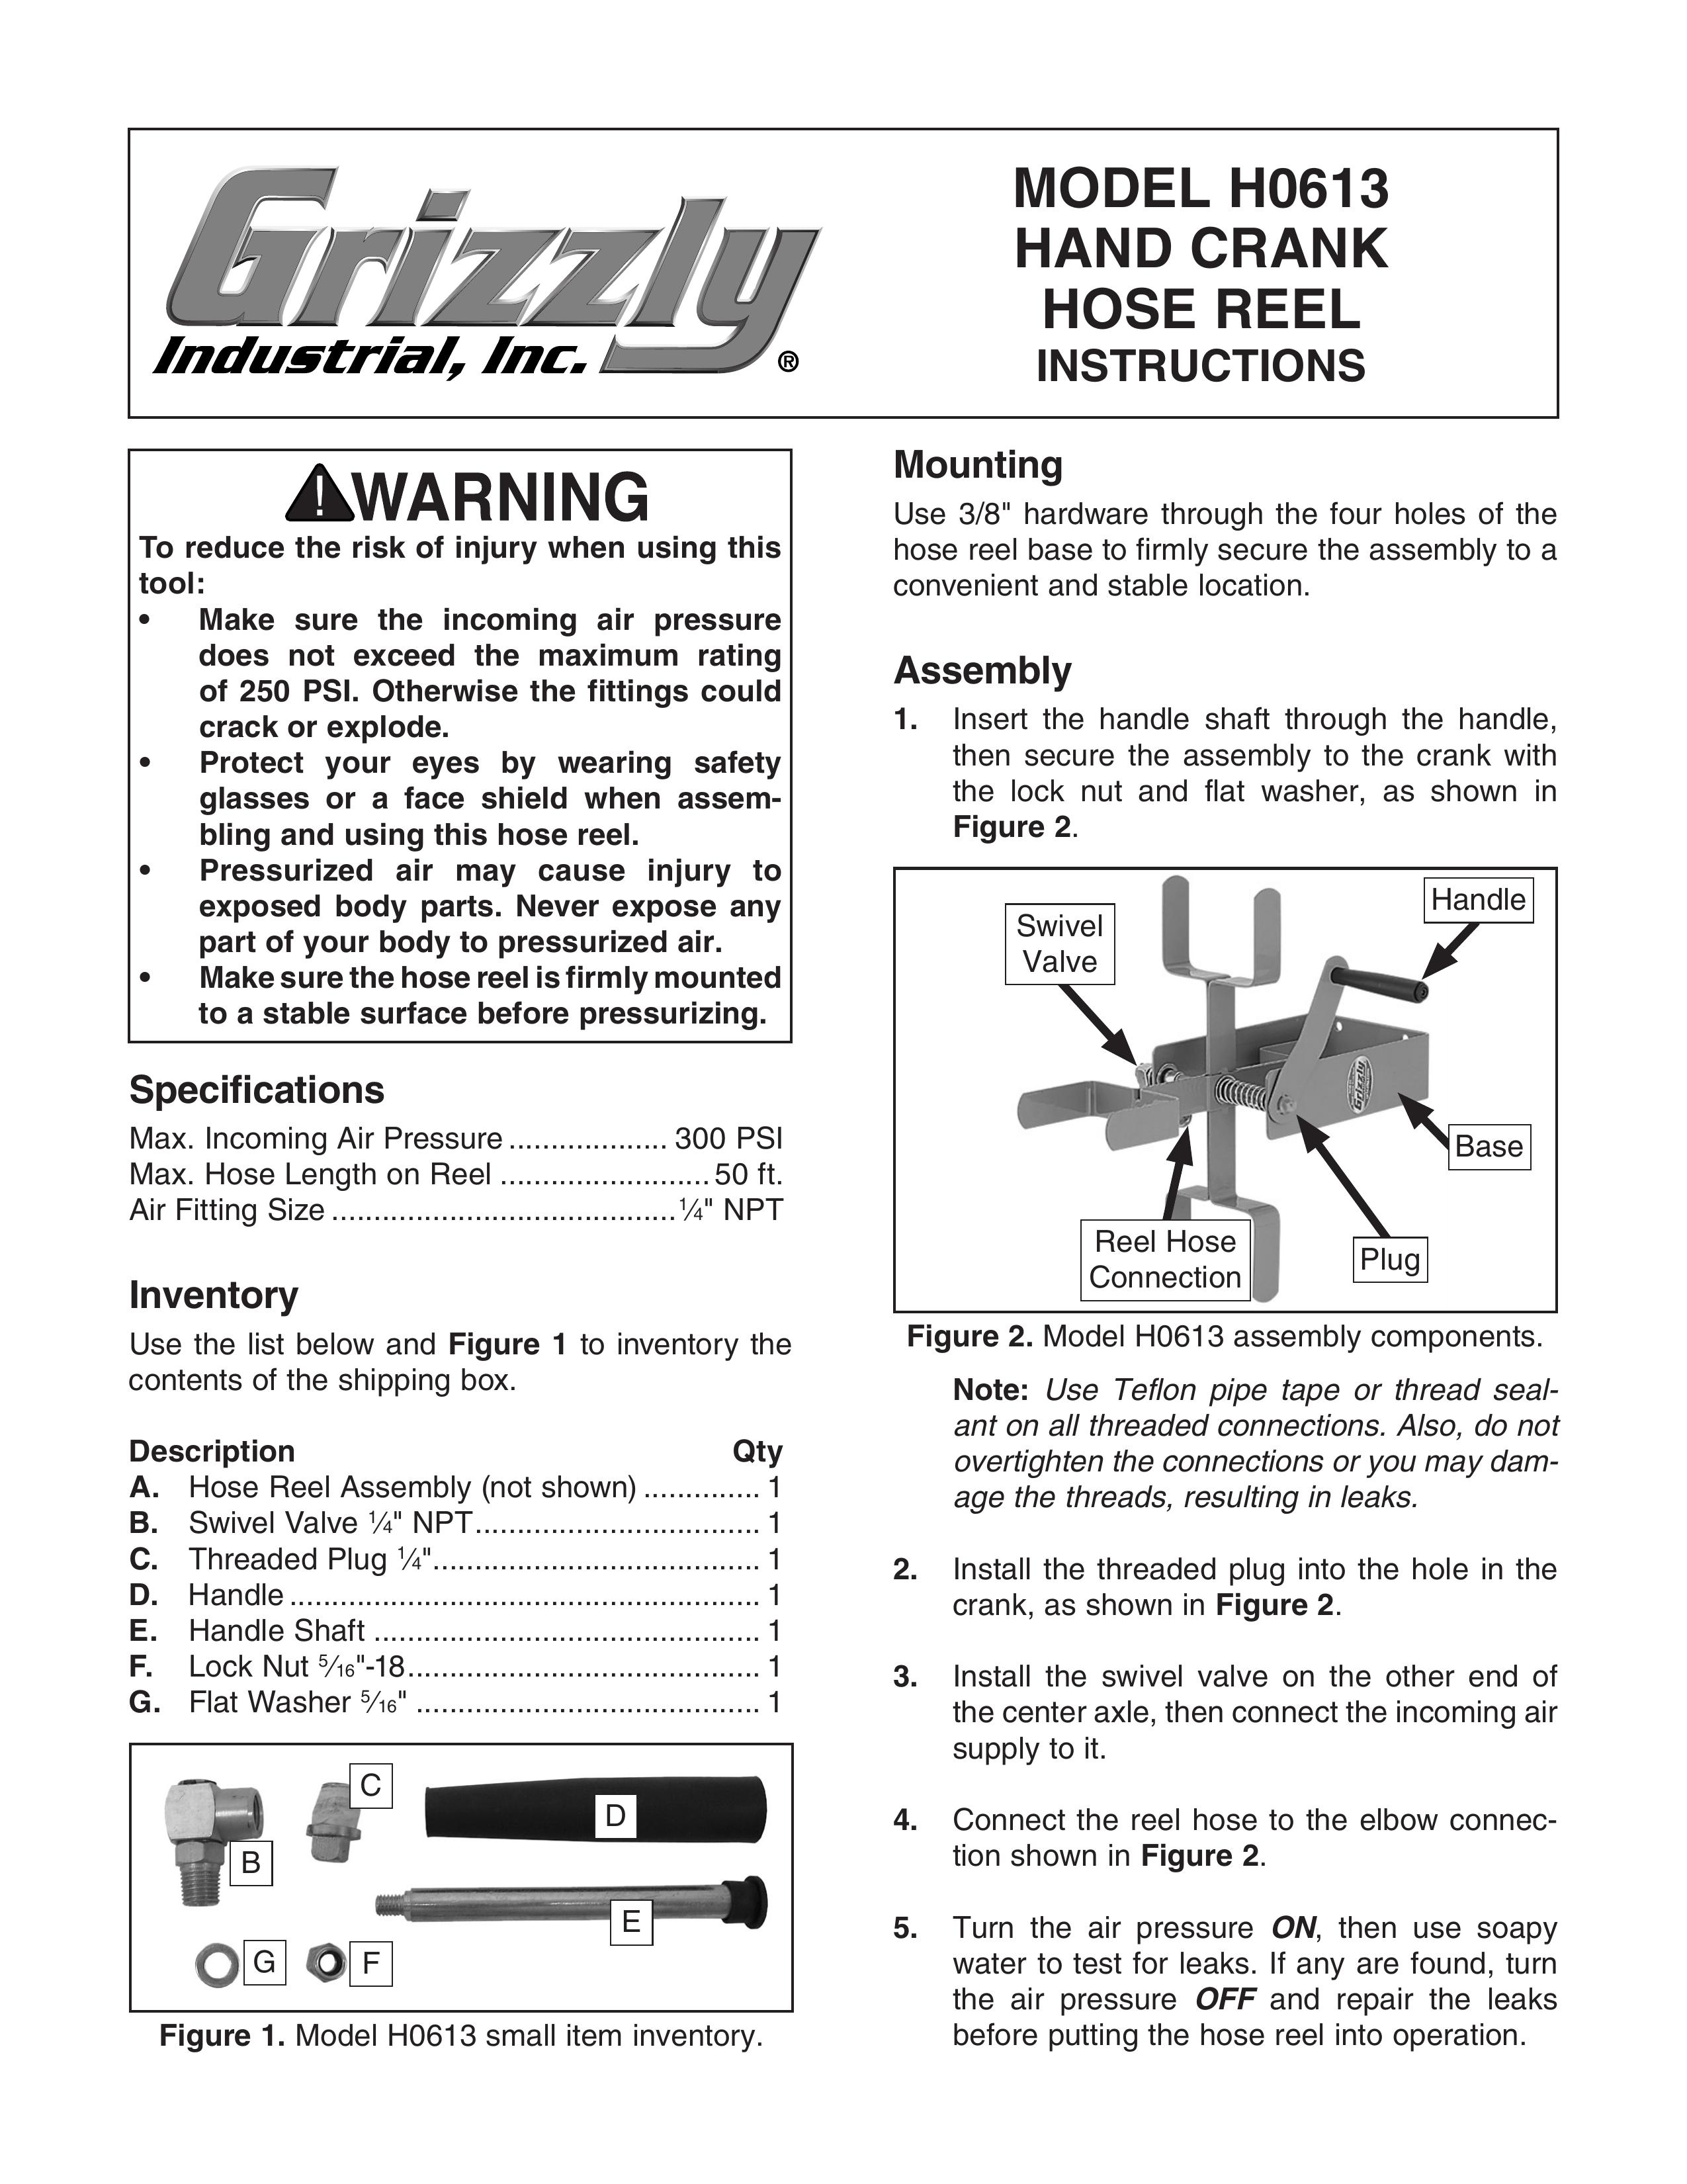 Grizzly H0613 Styling Iron User Manual